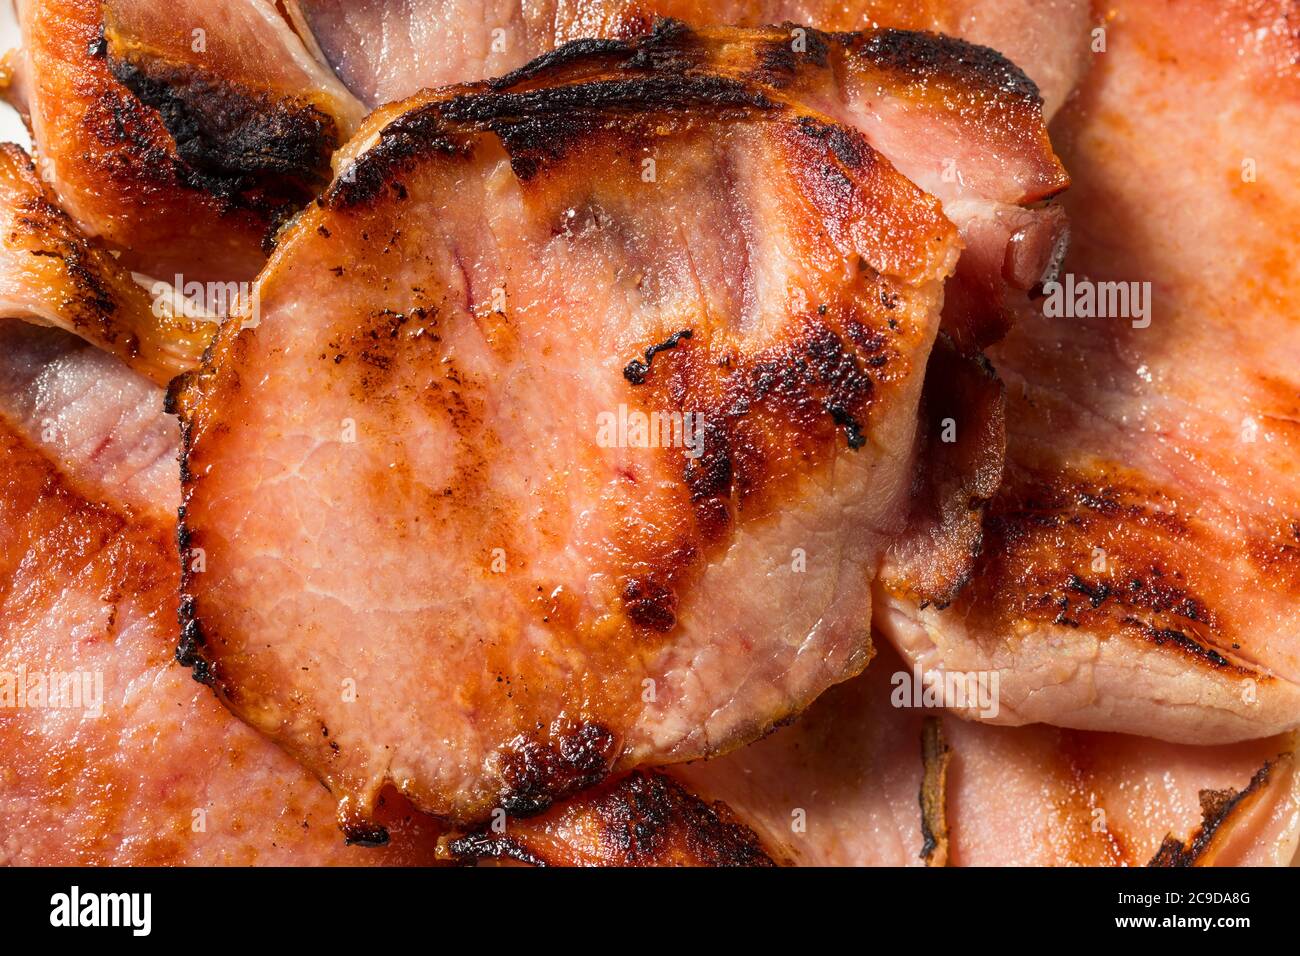 Homemade Cooked Canadian Bacon to Eat for Breakfast Stock Photo